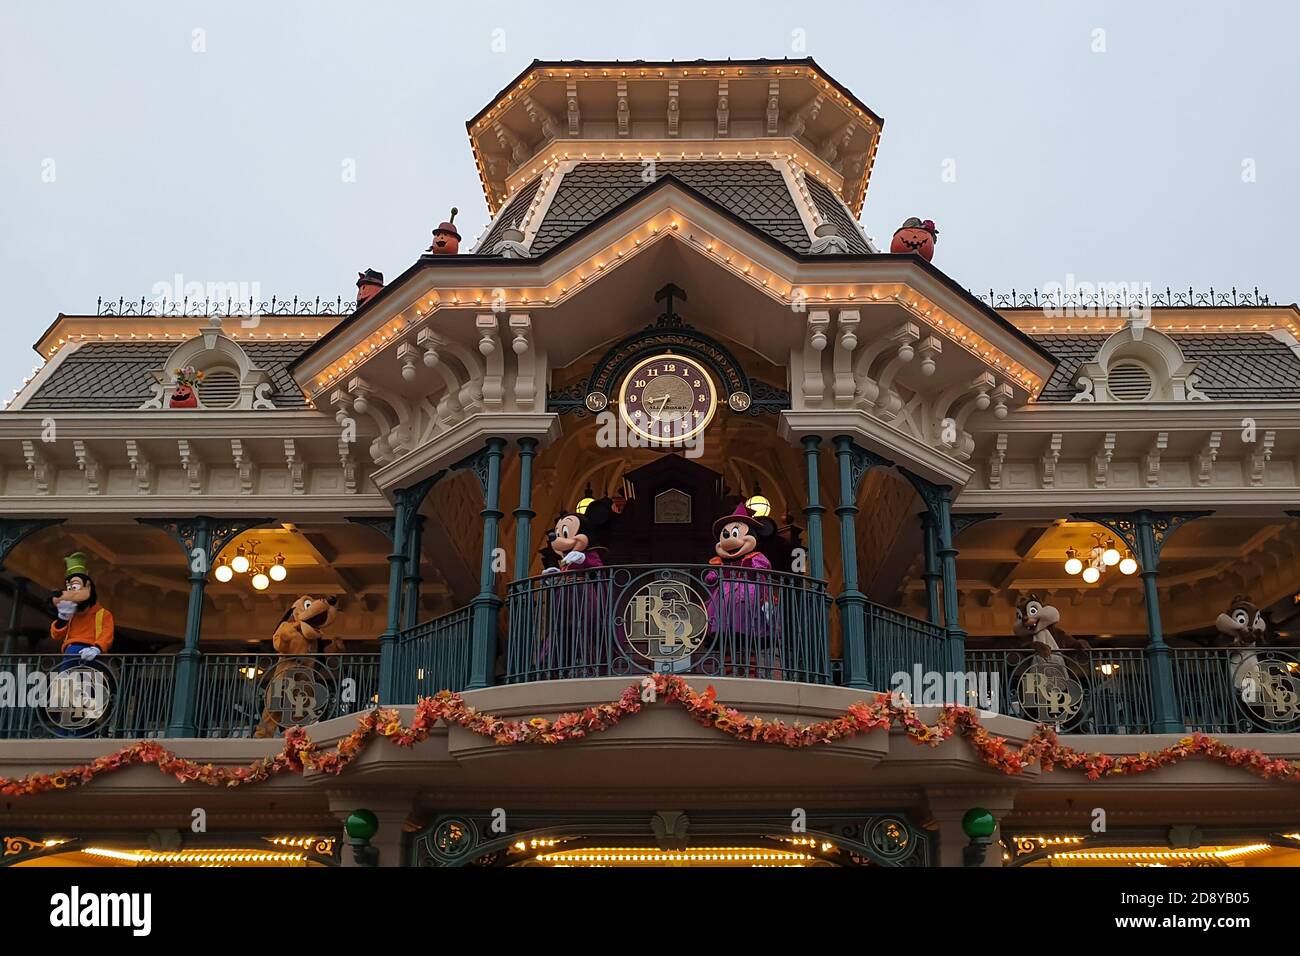 Chessy, France - October 10, 2020: Mickey and Minnie saying goodbye in season Halloween in Disneyland Paris before another closure due to the coronavi Stock Photo